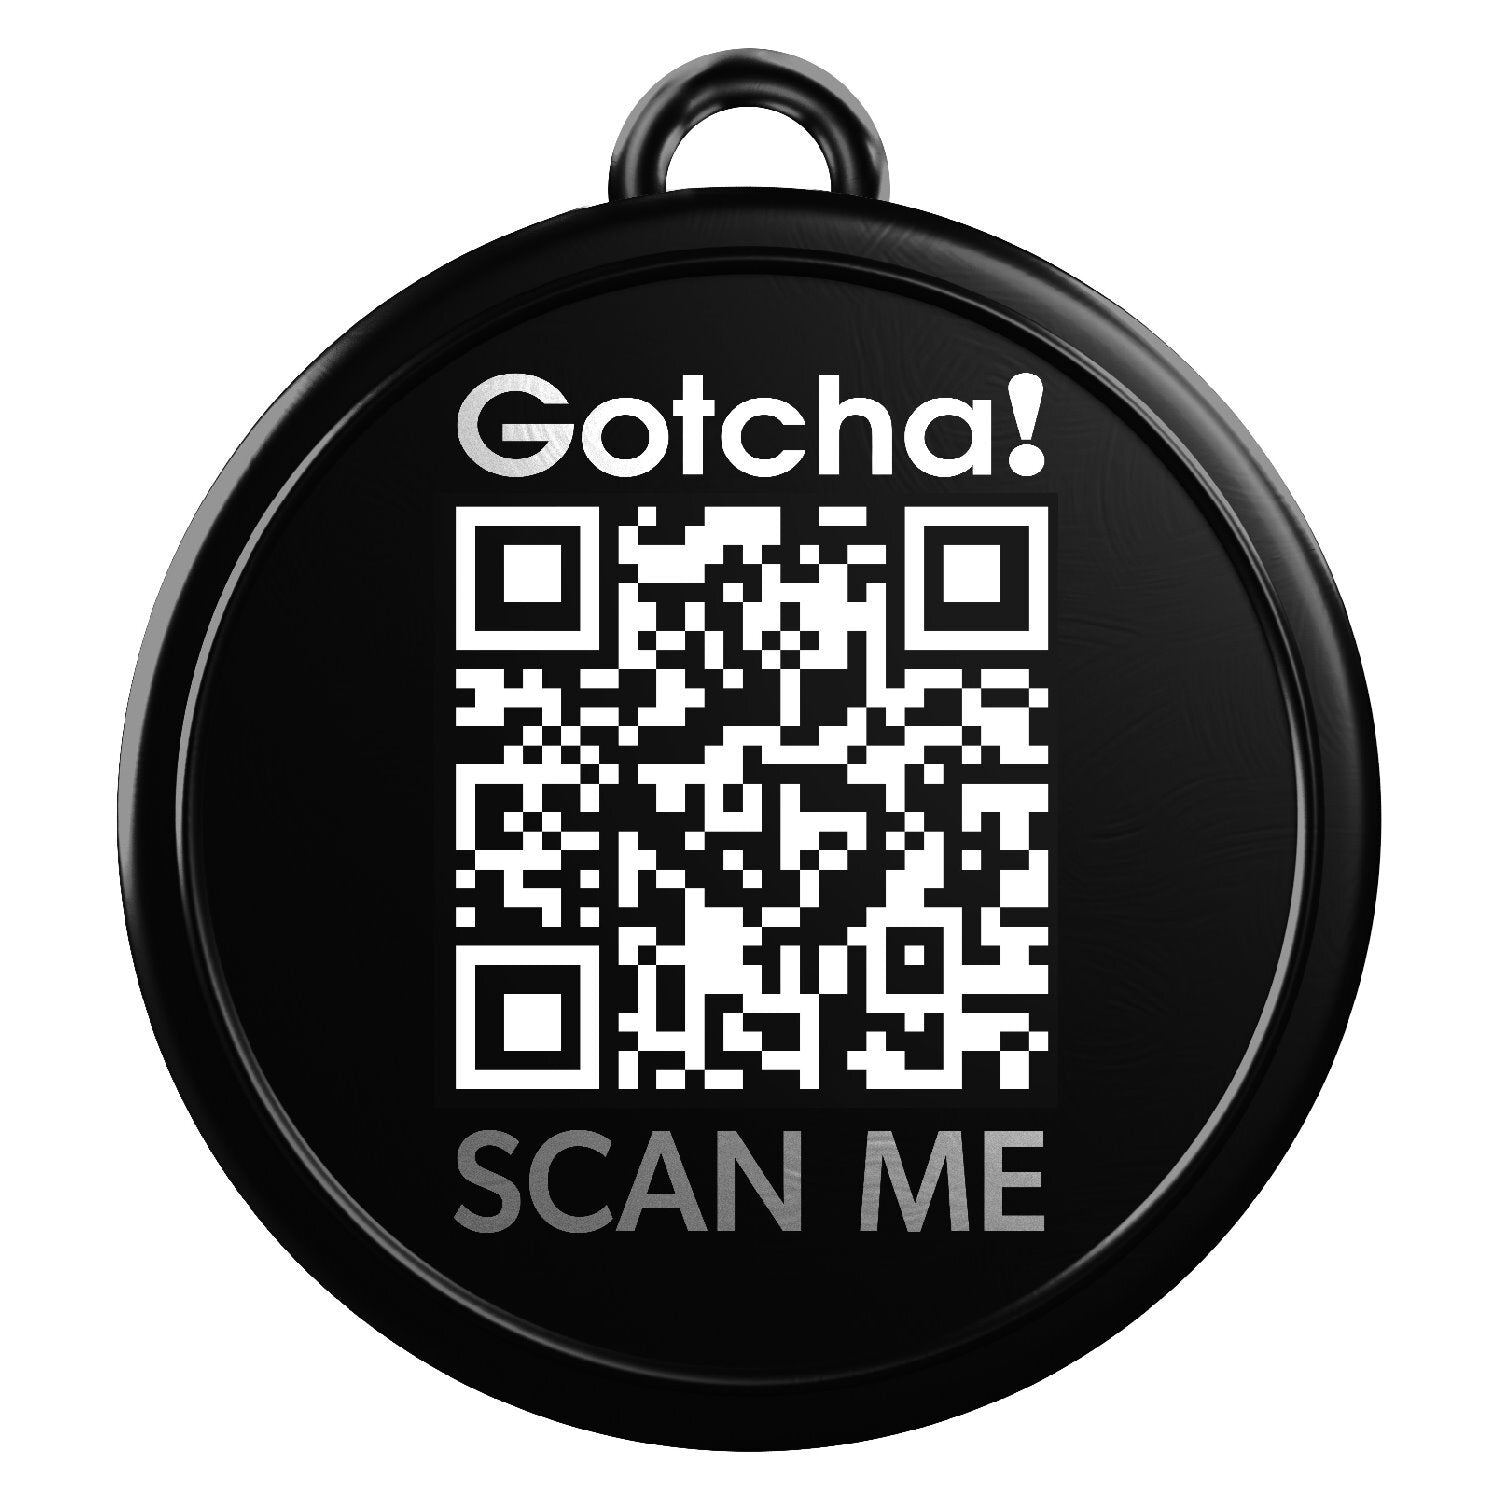 Max & Molly GOTCHA! Smart Pet ID Tag with QR Code - Pets and More